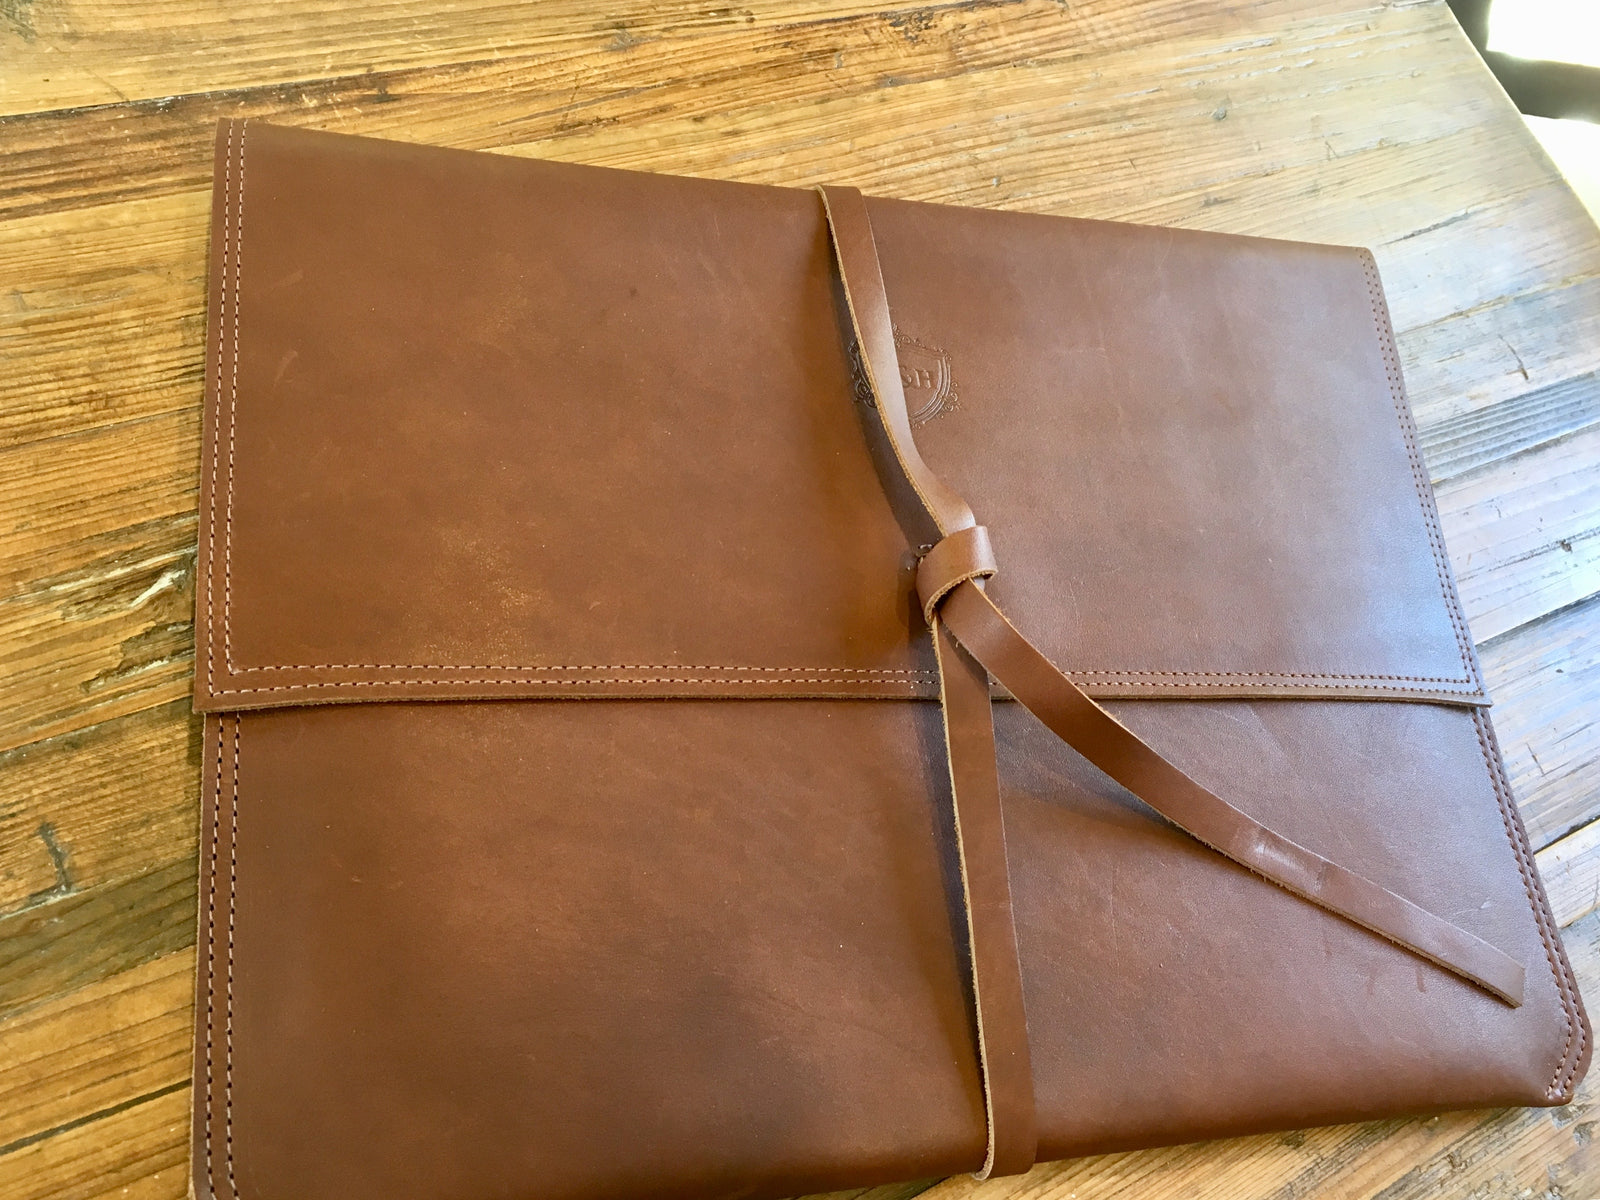 Leather Laptop Sleeve - Swagger & Hide | Our leather luggage accessories and leather travel bags make the perfect gift for him!  All of our products are handcrafted and personalised.